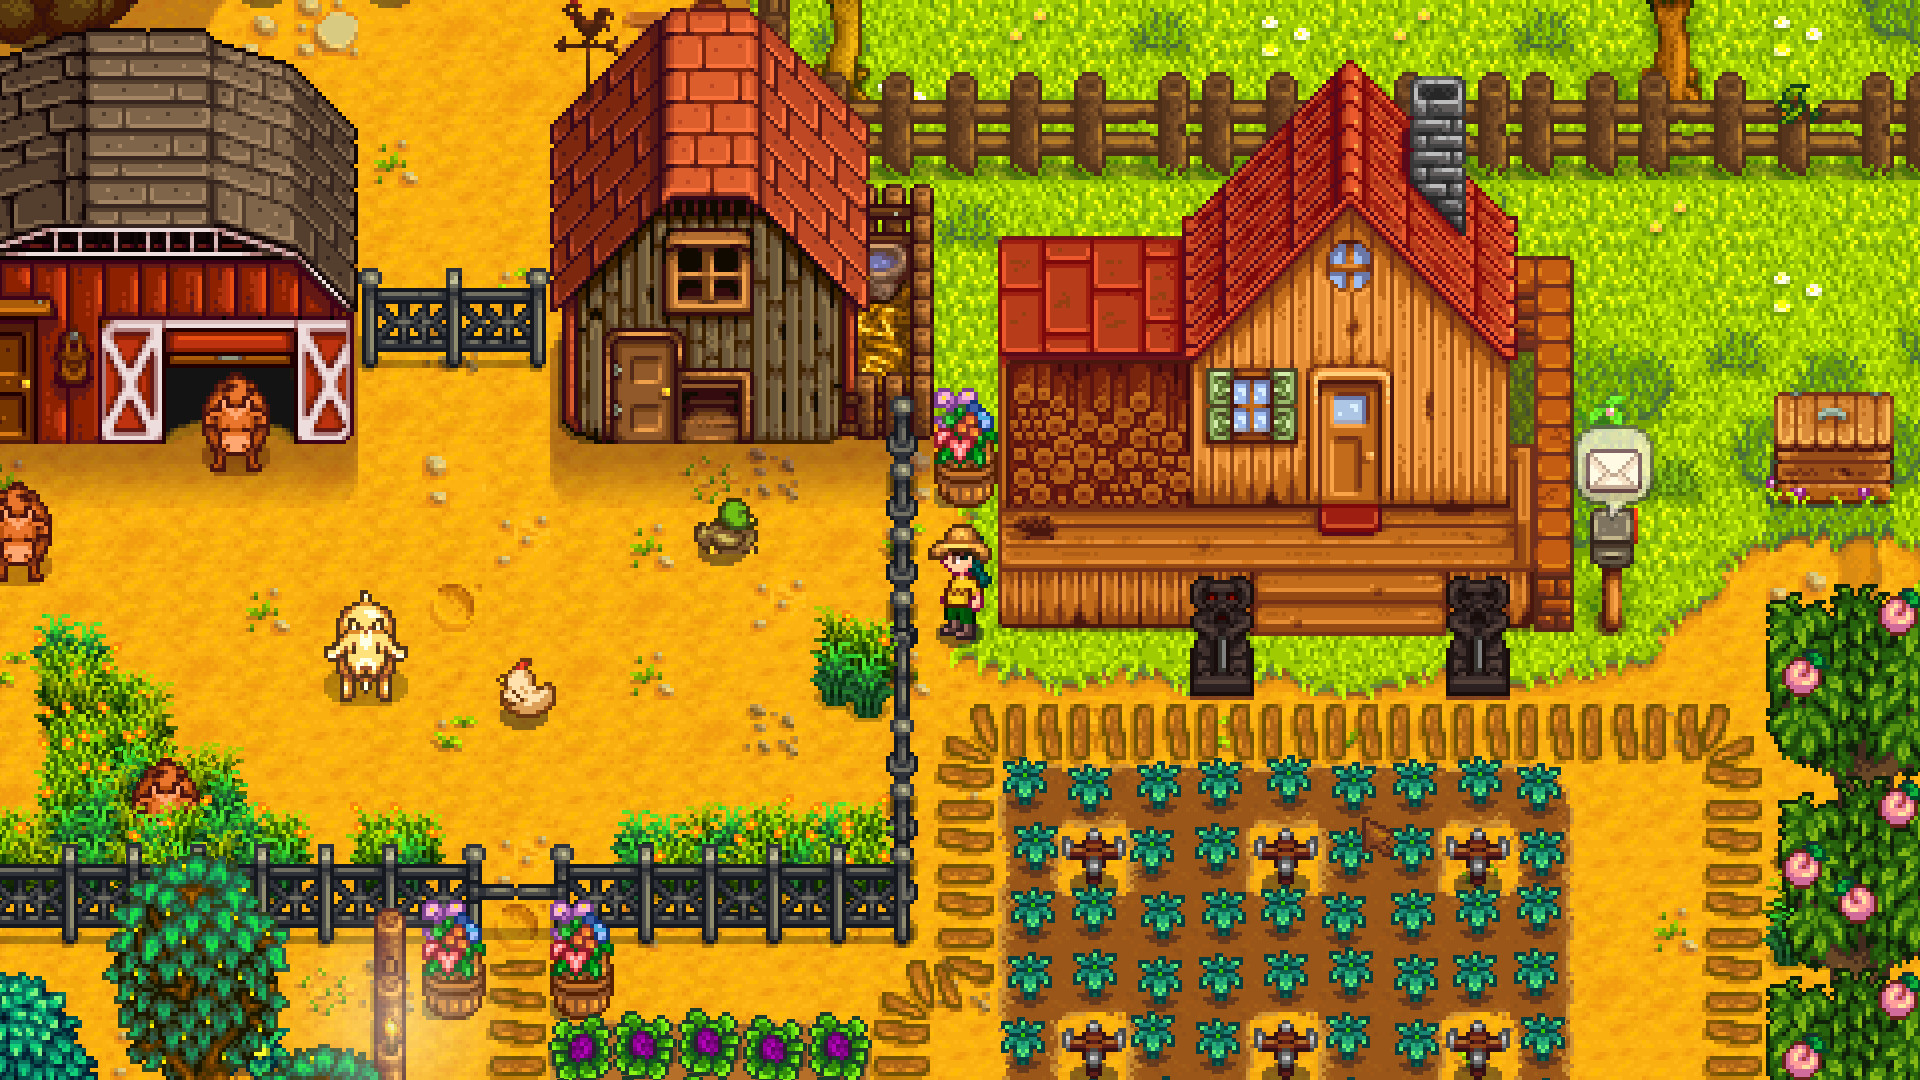 Best mobile RPGs: Stardew Valley. Image shows a happy pixelated farm.